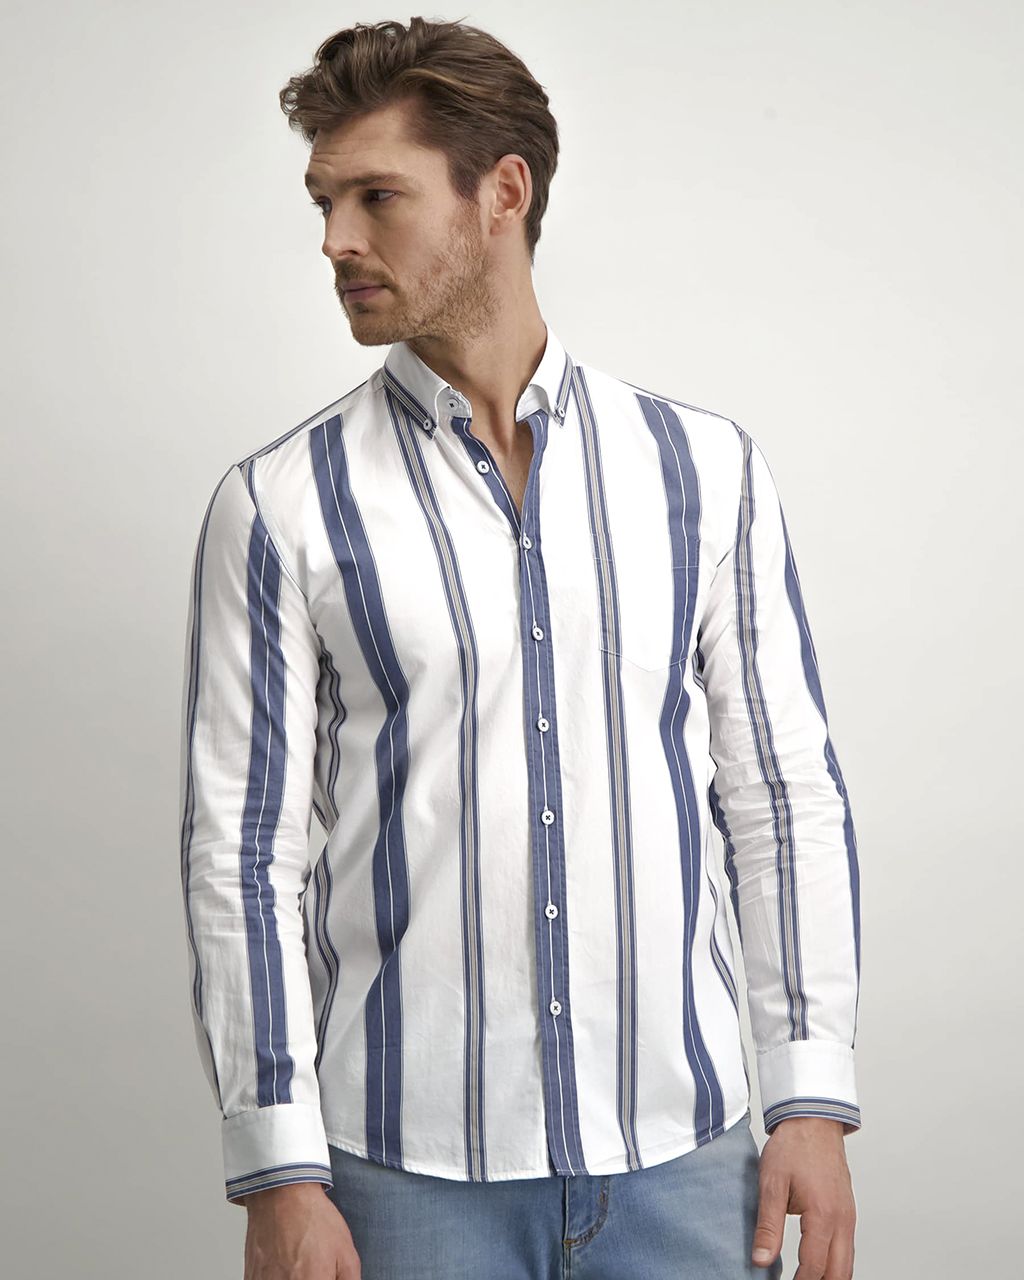 State of Art Casual Overhemd LM Blauw 075897-001-4XL